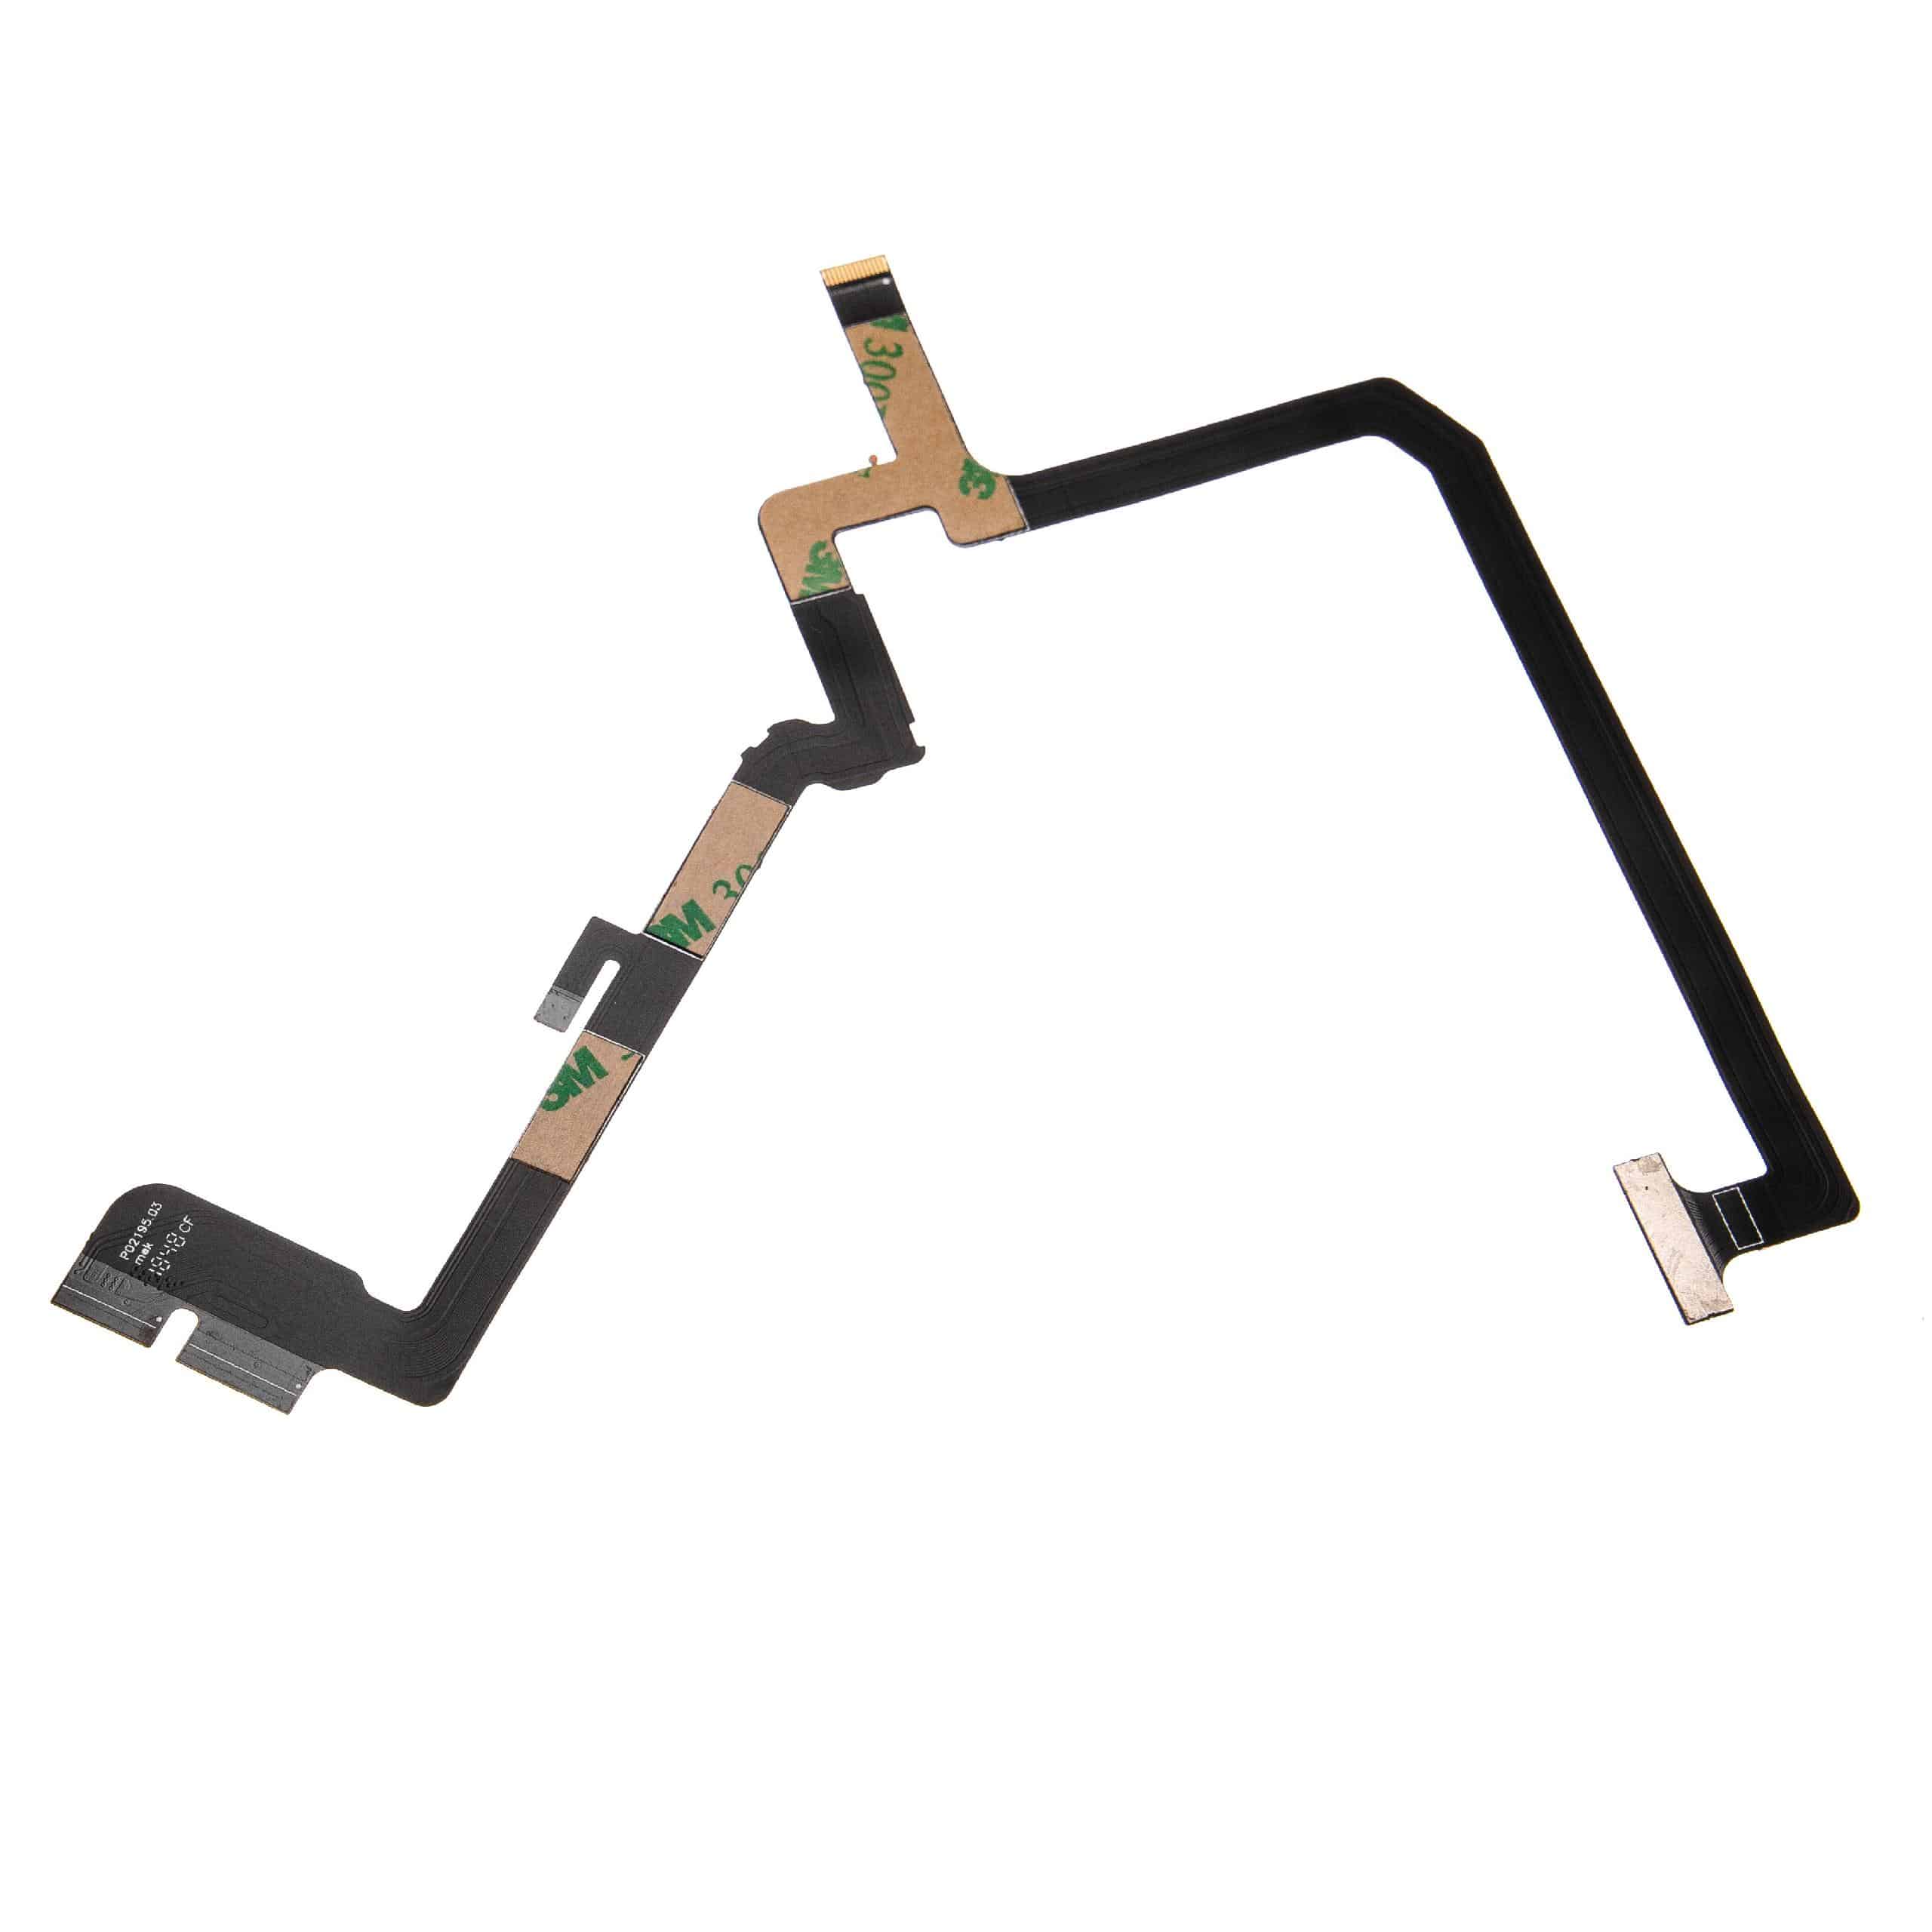 Ribbon Flex Cable suitable for DJI Phantom 4 Pro, 4 Pro+ Drone, Gimbal - with double-sided tape